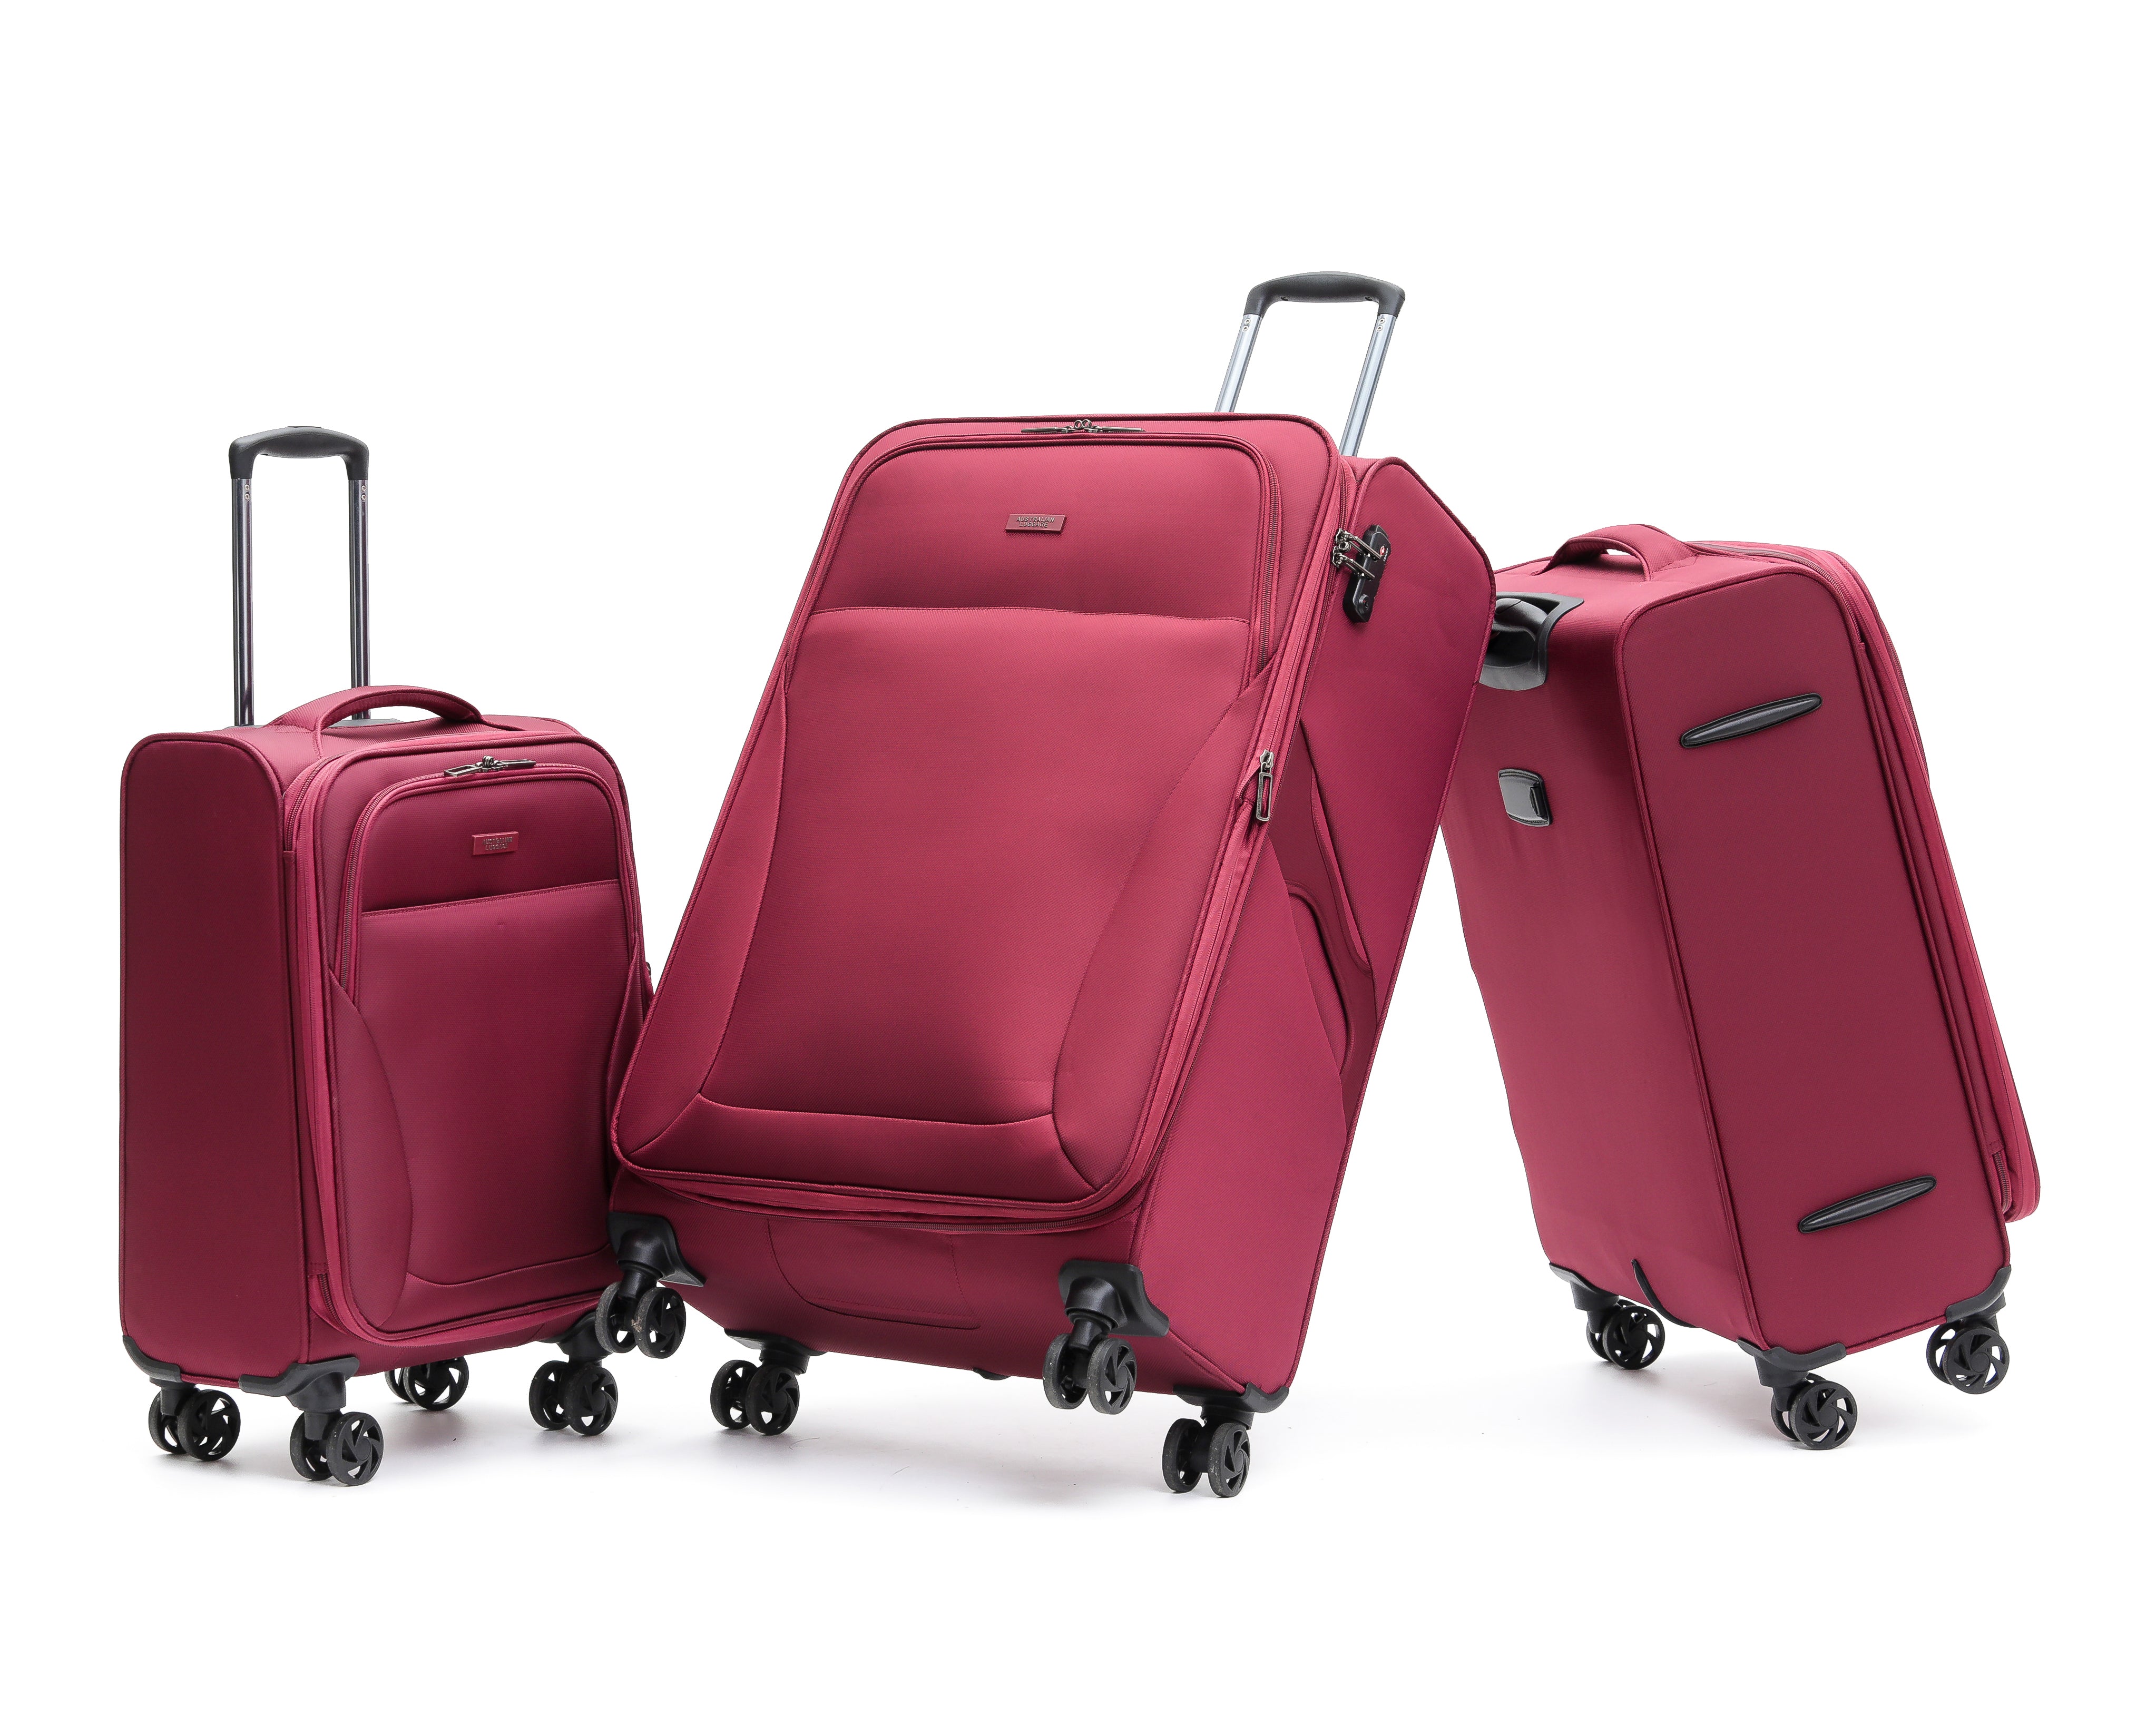 Aus Luggage - WINGS Set of 3 Suitcases - Wine-3